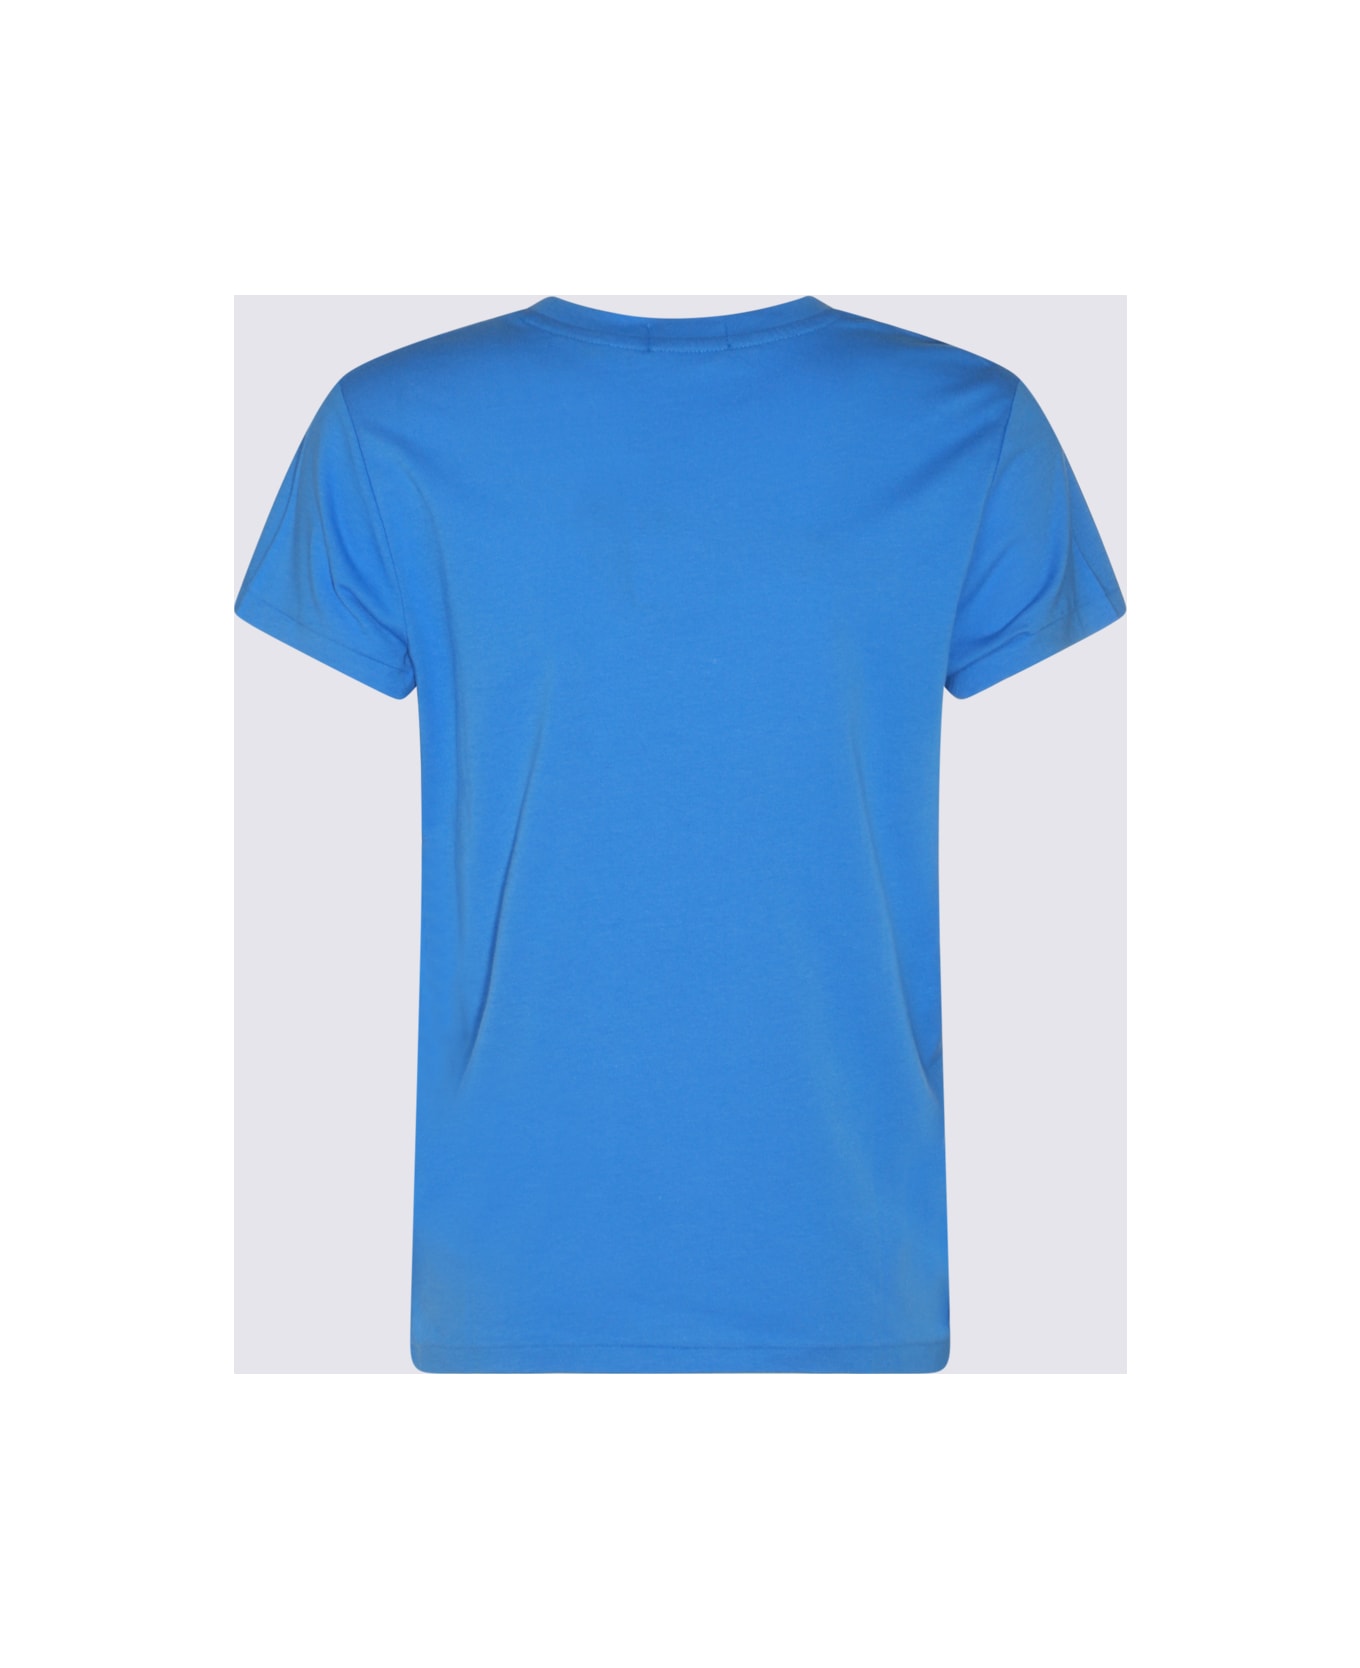 Polo Ralph Lauren Cobalt Blue And White Cotton T-shirt - COLBY BLUE